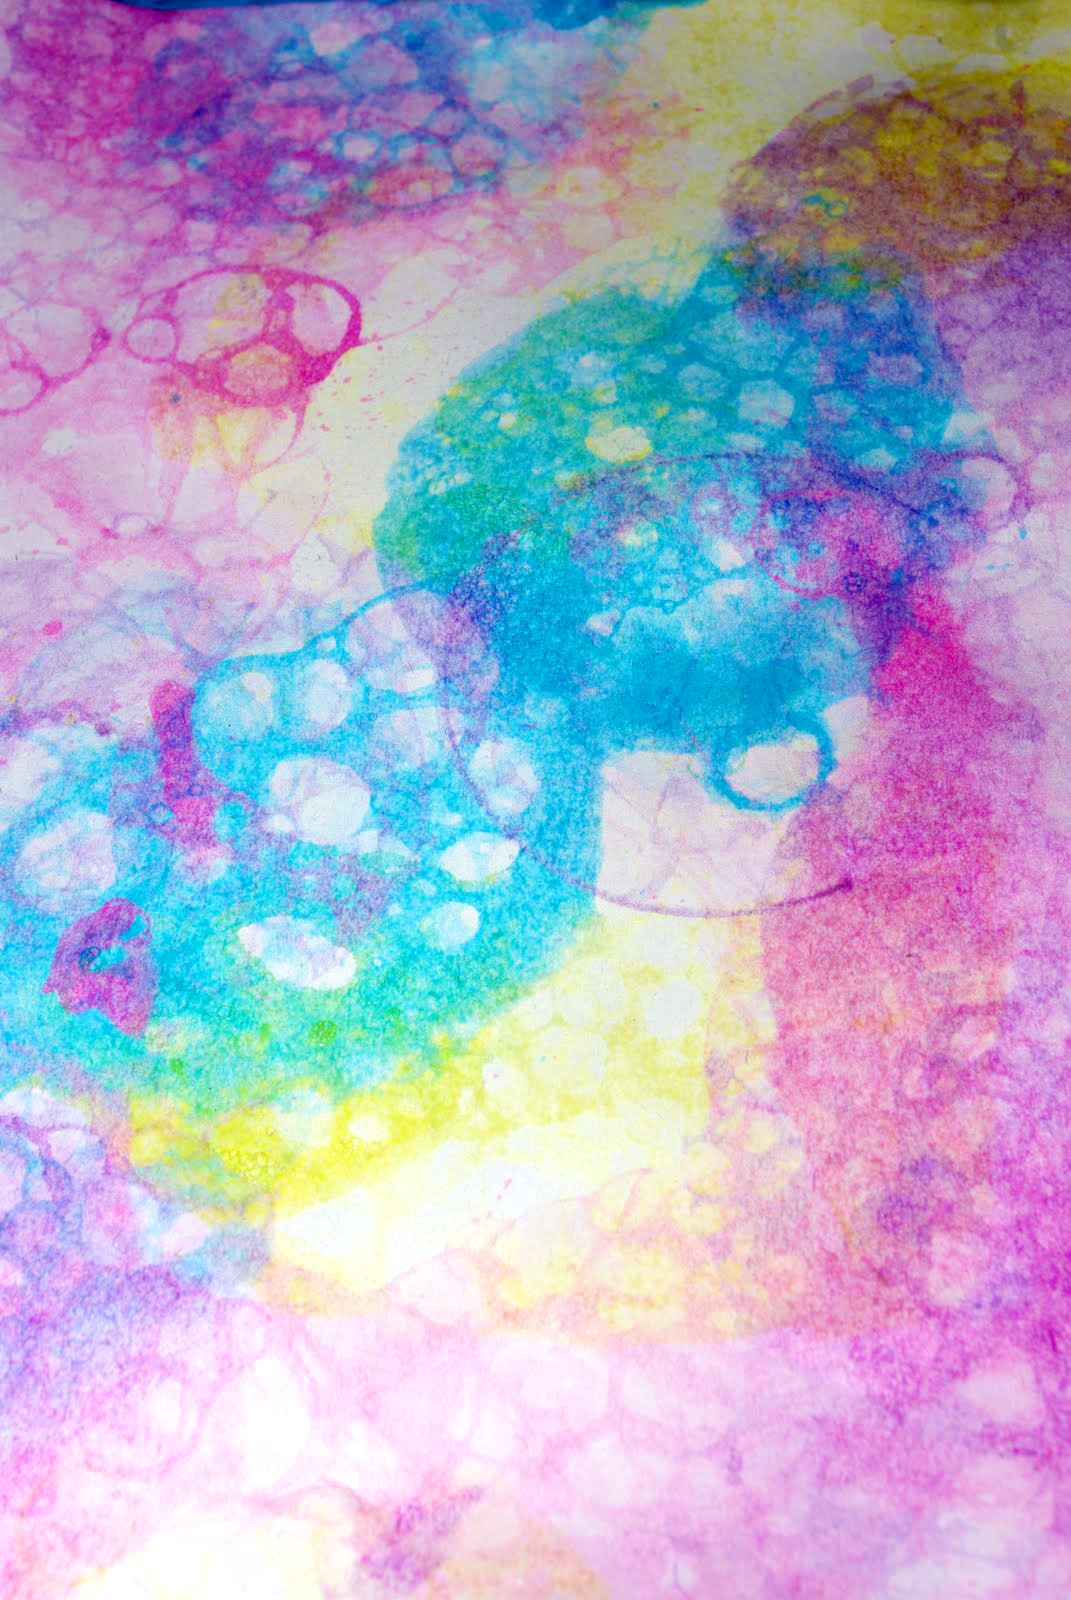 Bubble Painting Craft image. Follow text below on how to make the craft. 